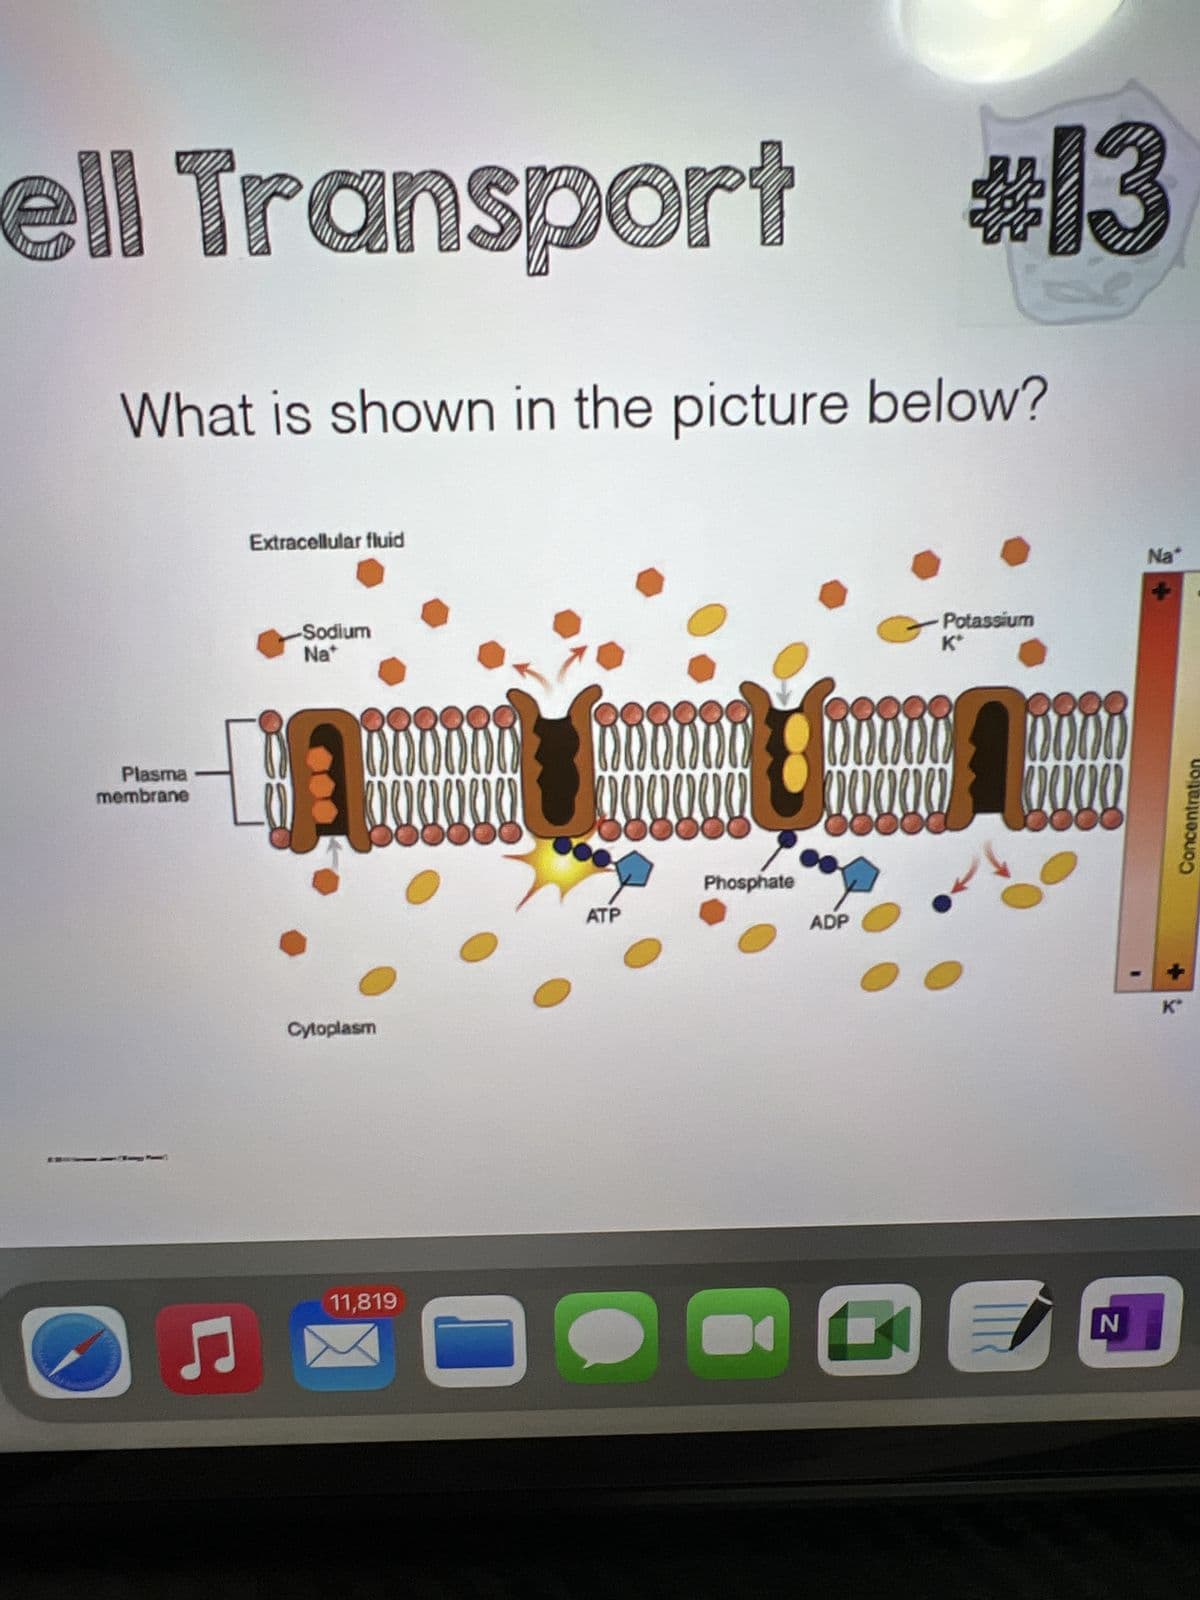 ell Transport
What is shown in the picture below?
Plasma
membrane
C
Extracellular fluid
-Sodium
Na
Cytoplasm
11,819
10000
www
0
ATP
Phosphate
ADP
#13
Potassium
K*
mo
00
20
N
Na
K"
Concentration